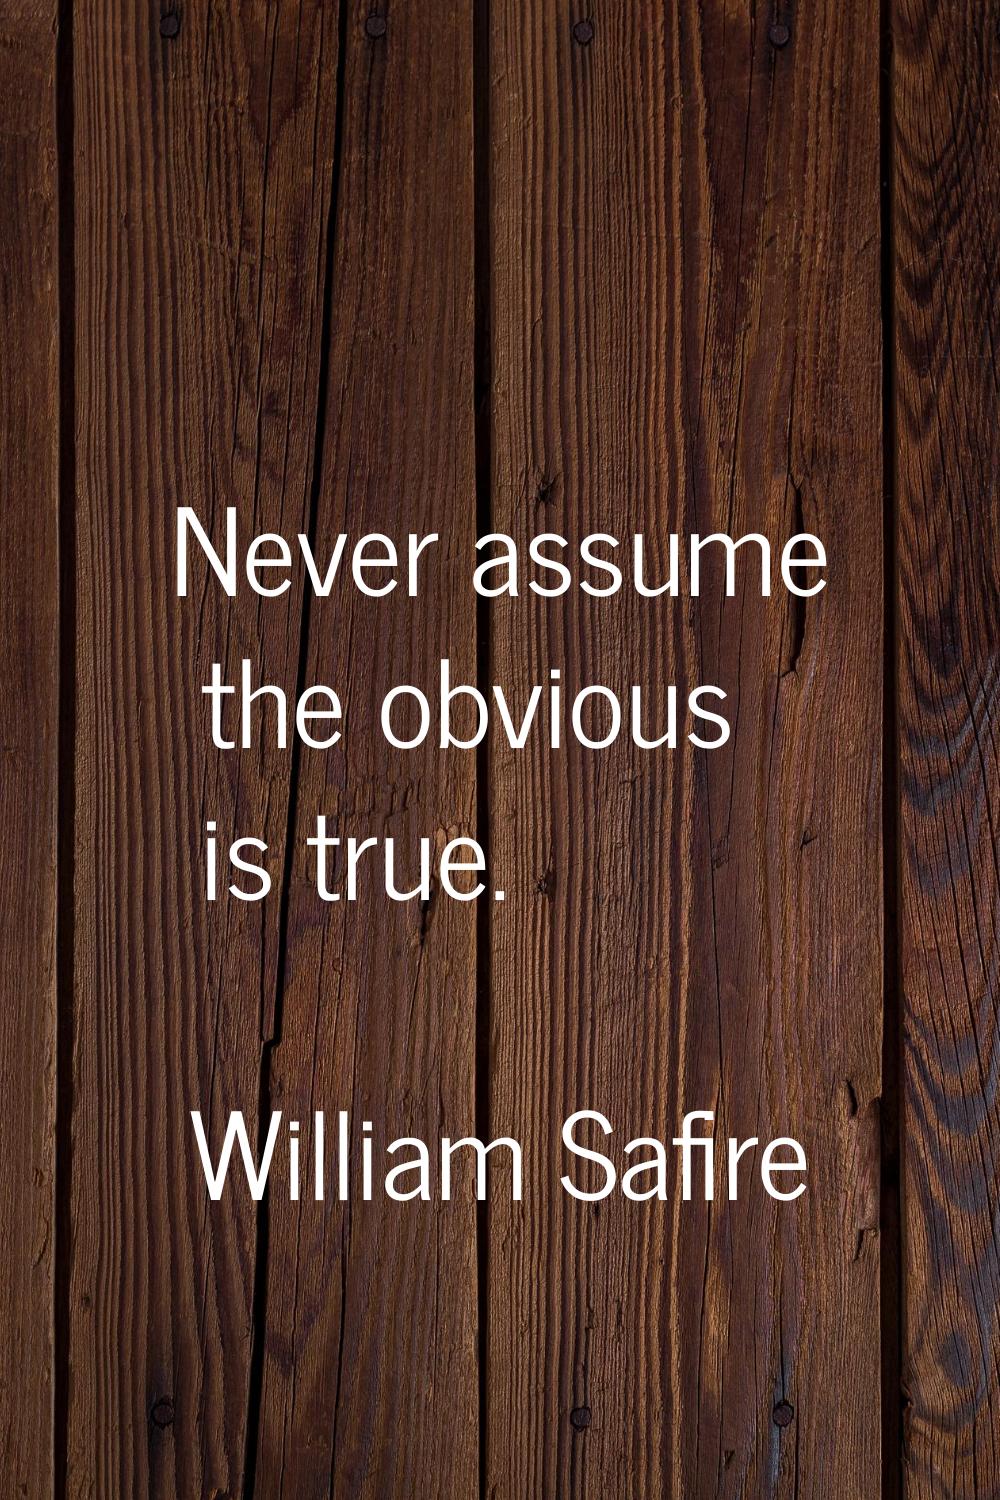 Never assume the obvious is true.